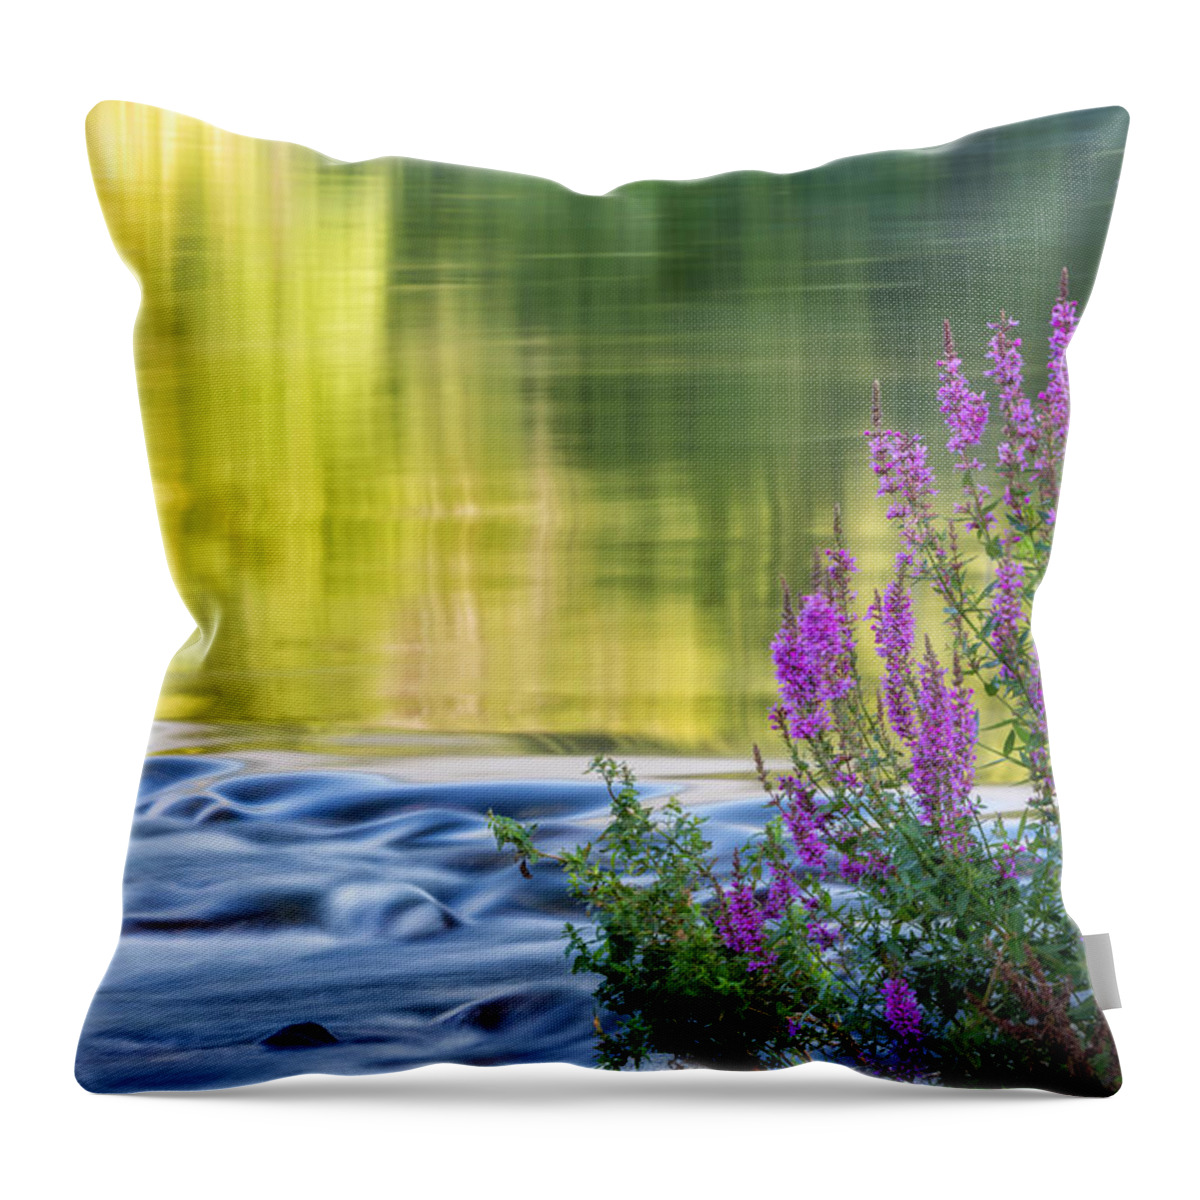 Reflection Throw Pillow featuring the photograph Summer Reflections by Bill Wakeley